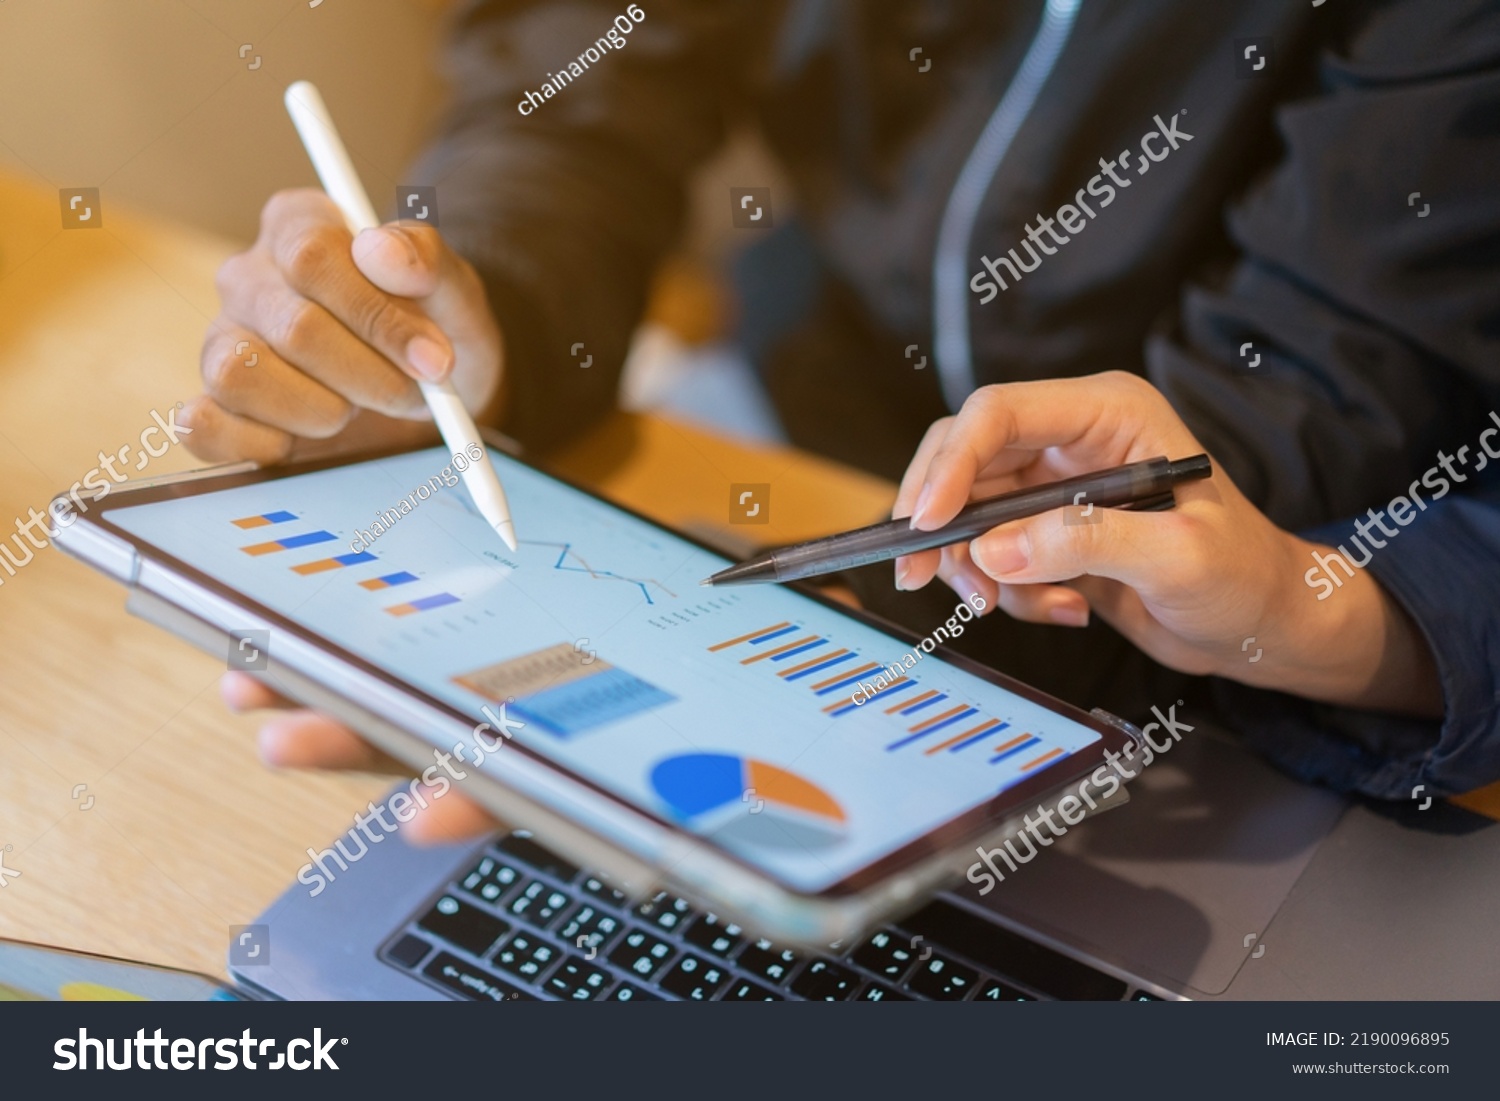 close up ceo businesswoman hand point on dashboard screen tablet device for ask and share idea or consulting with businessman partner for business team and work from home concept #2190096895